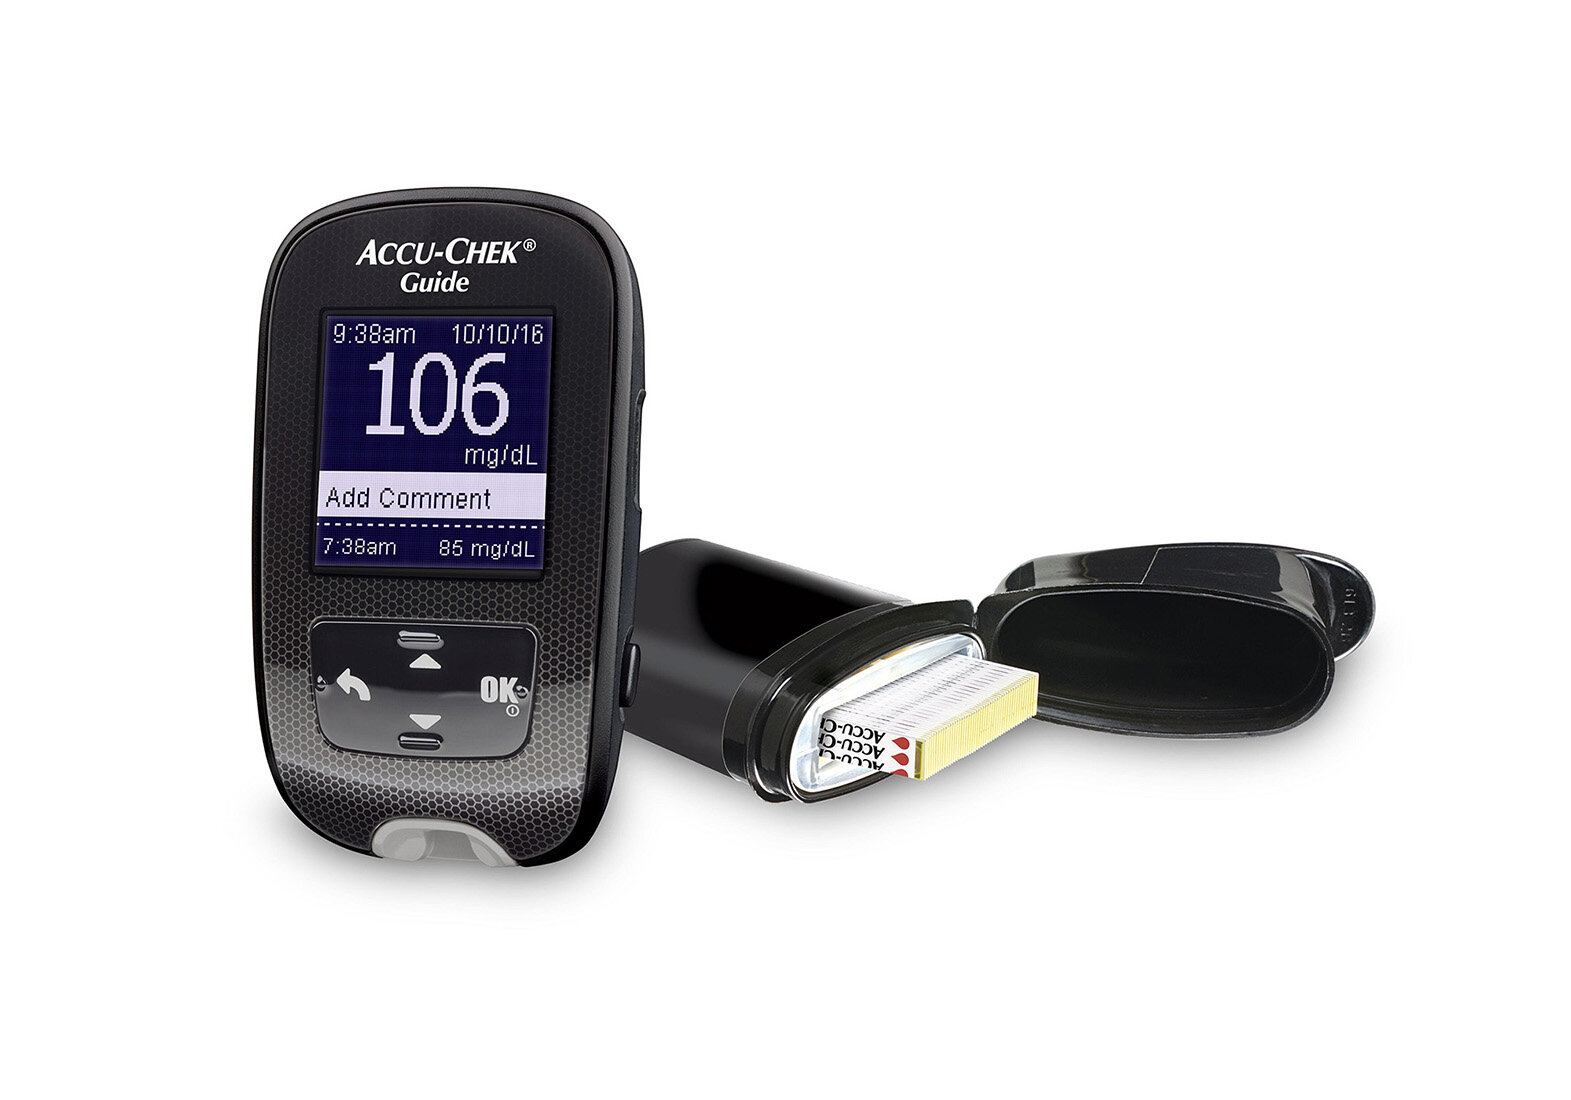 636311438610887214-Roche-Accu-Chek-Guide-System-diabetes-blood-glucose-monitoring-system_2.jpg